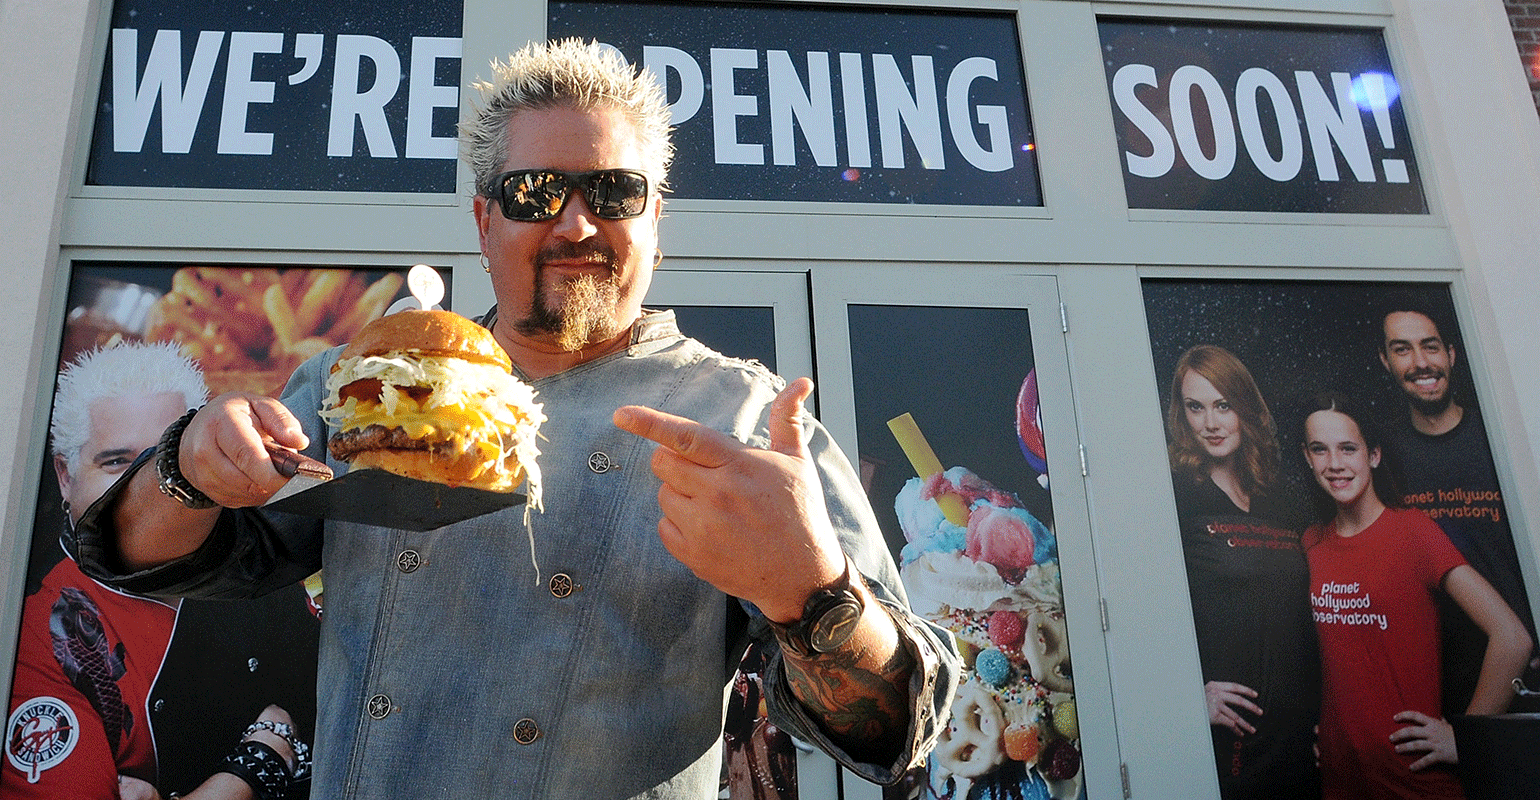 Guy Fieri: Just be yourself.